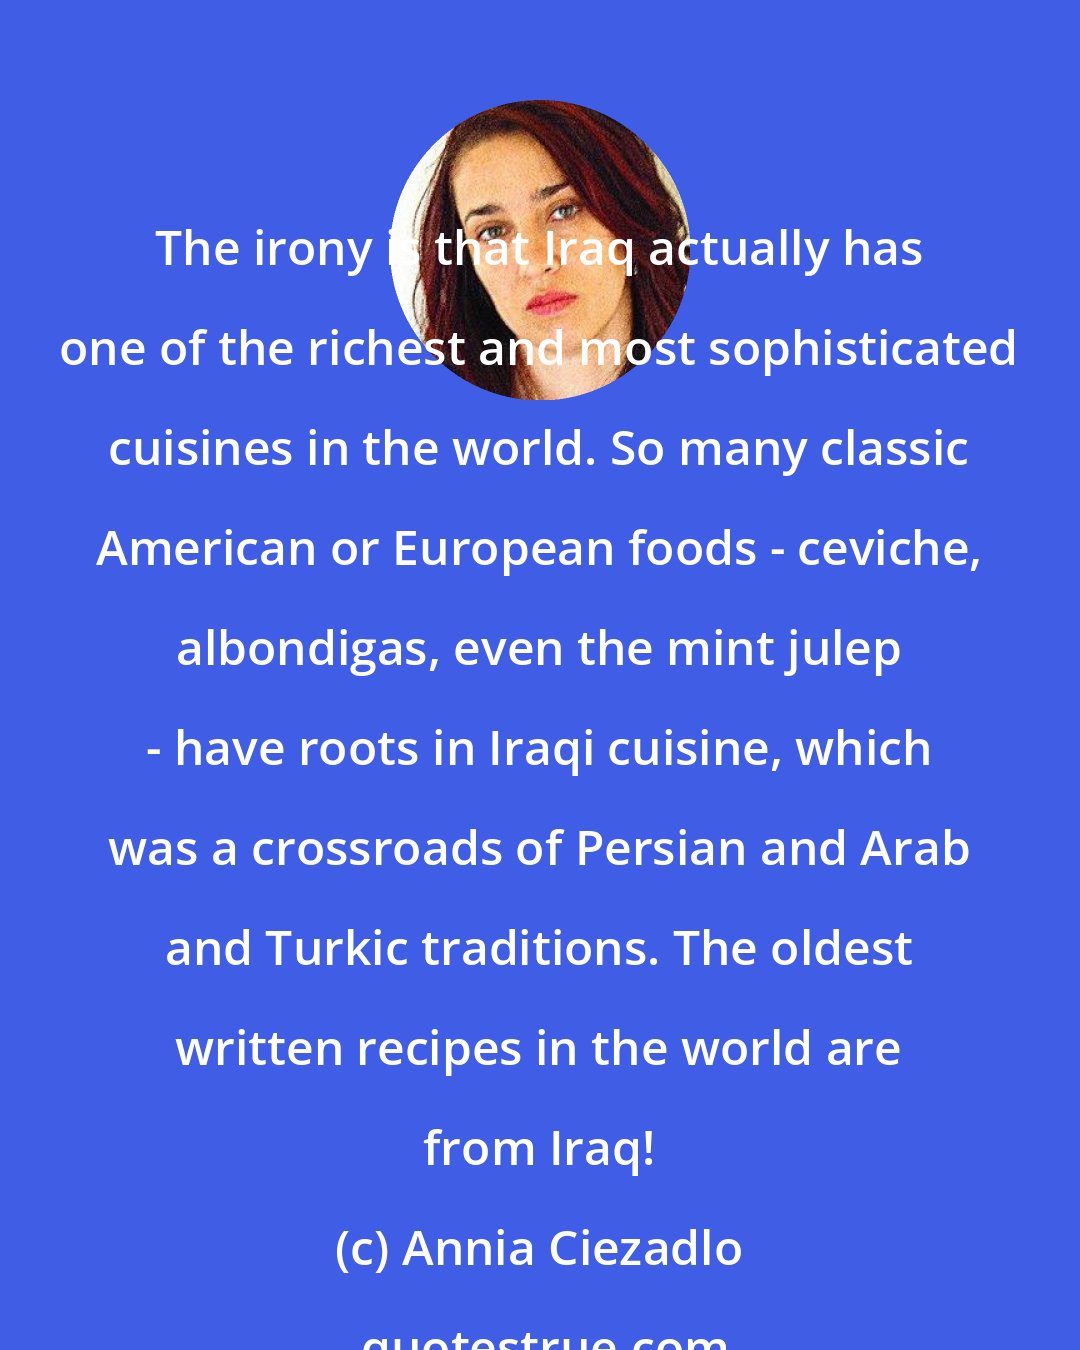 Annia Ciezadlo: The irony is that Iraq actually has one of the richest and most sophisticated cuisines in the world. So many classic American or European foods - ceviche, albondigas, even the mint julep - have roots in Iraqi cuisine, which was a crossroads of Persian and Arab and Turkic traditions. The oldest written recipes in the world are from Iraq!